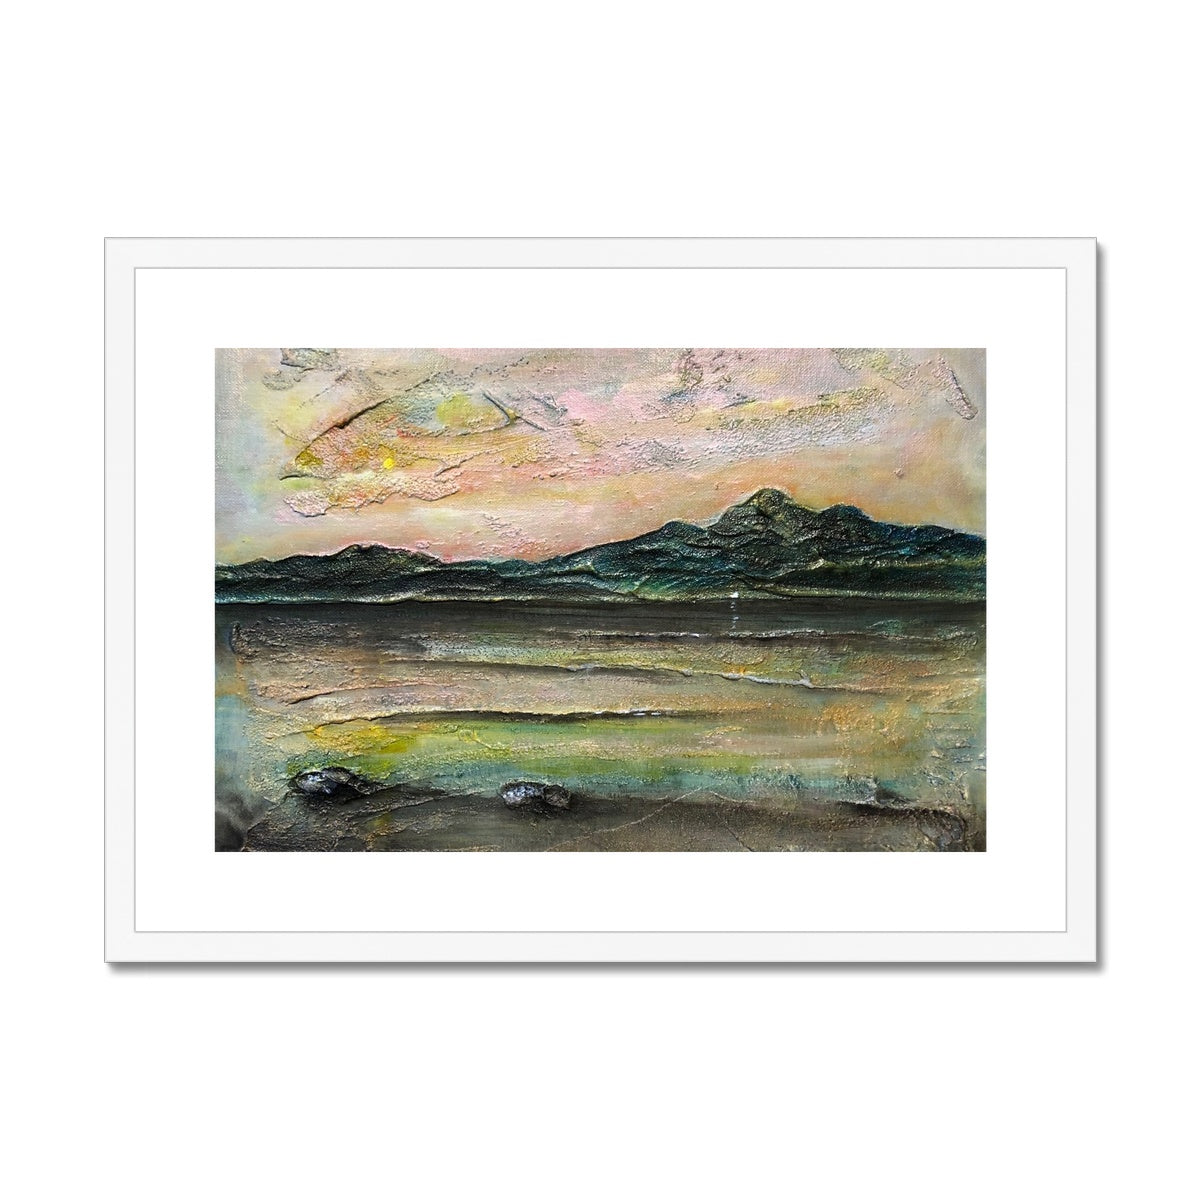 An Ethereal Loch Na Dal Skye Painting | Framed & Mounted Prints From Scotland-Framed & Mounted Prints-Scottish Lochs & Mountains Art Gallery-A2 Landscape-White Frame-Paintings, Prints, Homeware, Art Gifts From Scotland By Scottish Artist Kevin Hunter